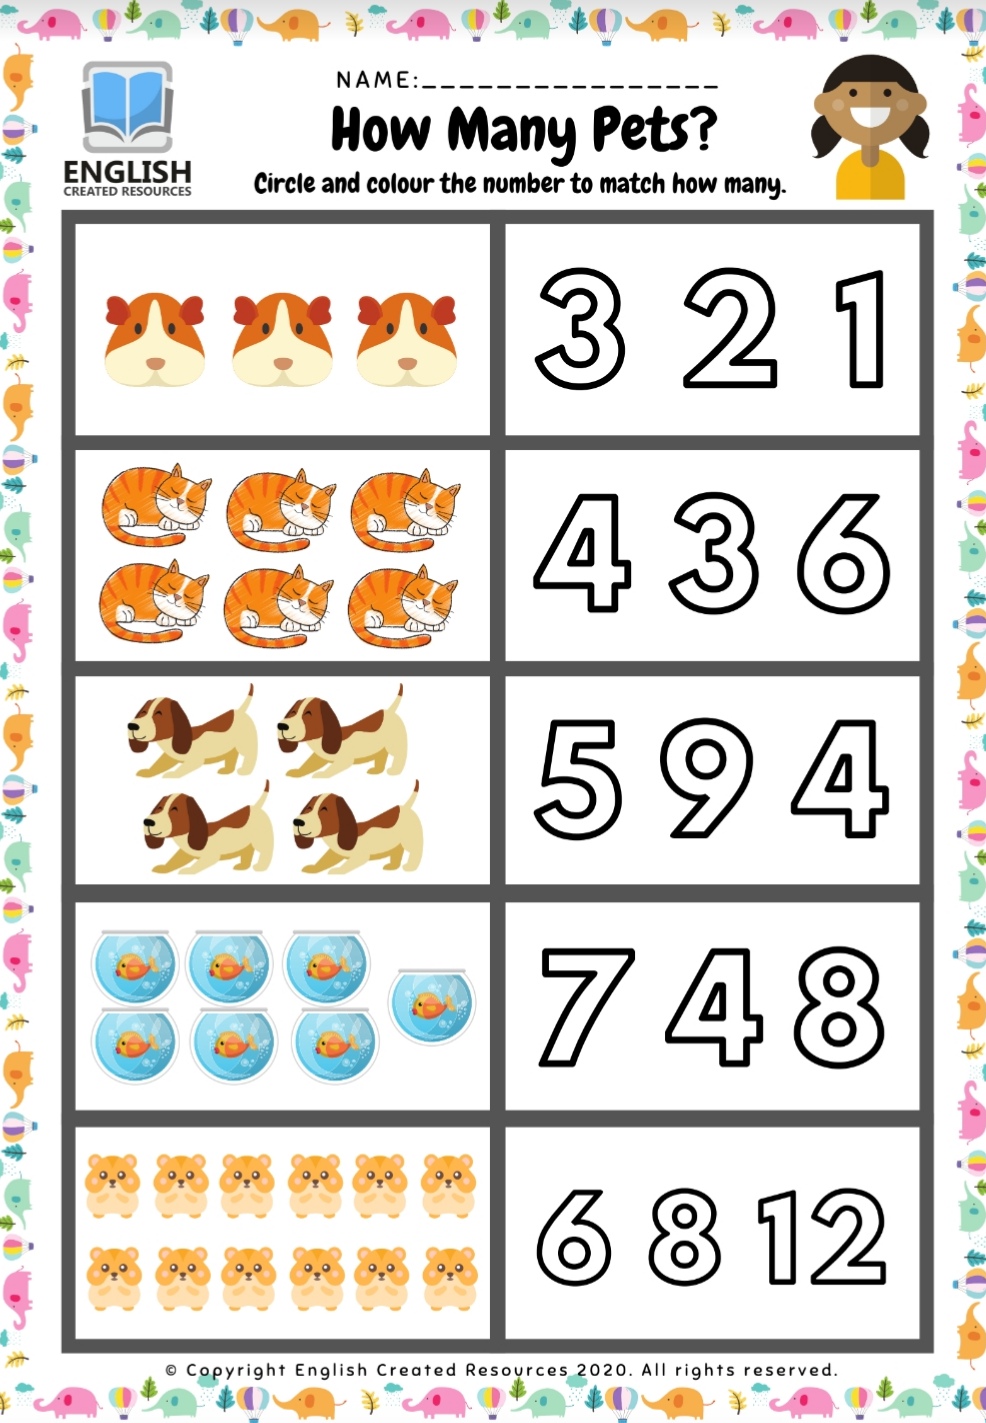 math-worksheets-for-kids-count-the-animals-english-created-resources